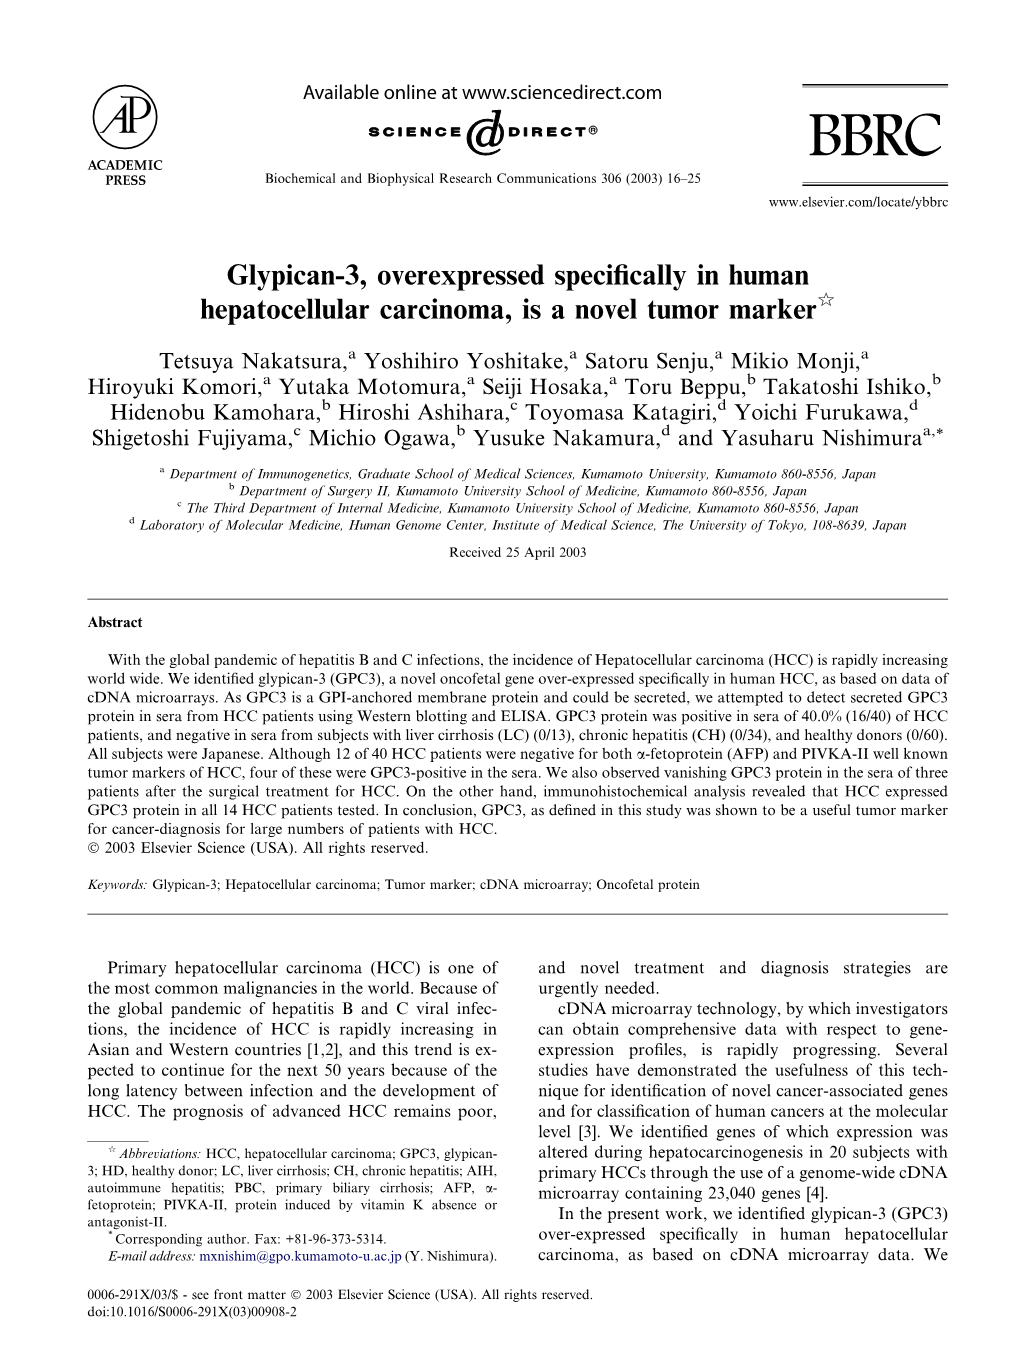 Glypican-3, Overexpressed Specifically in Human Hepatocellular